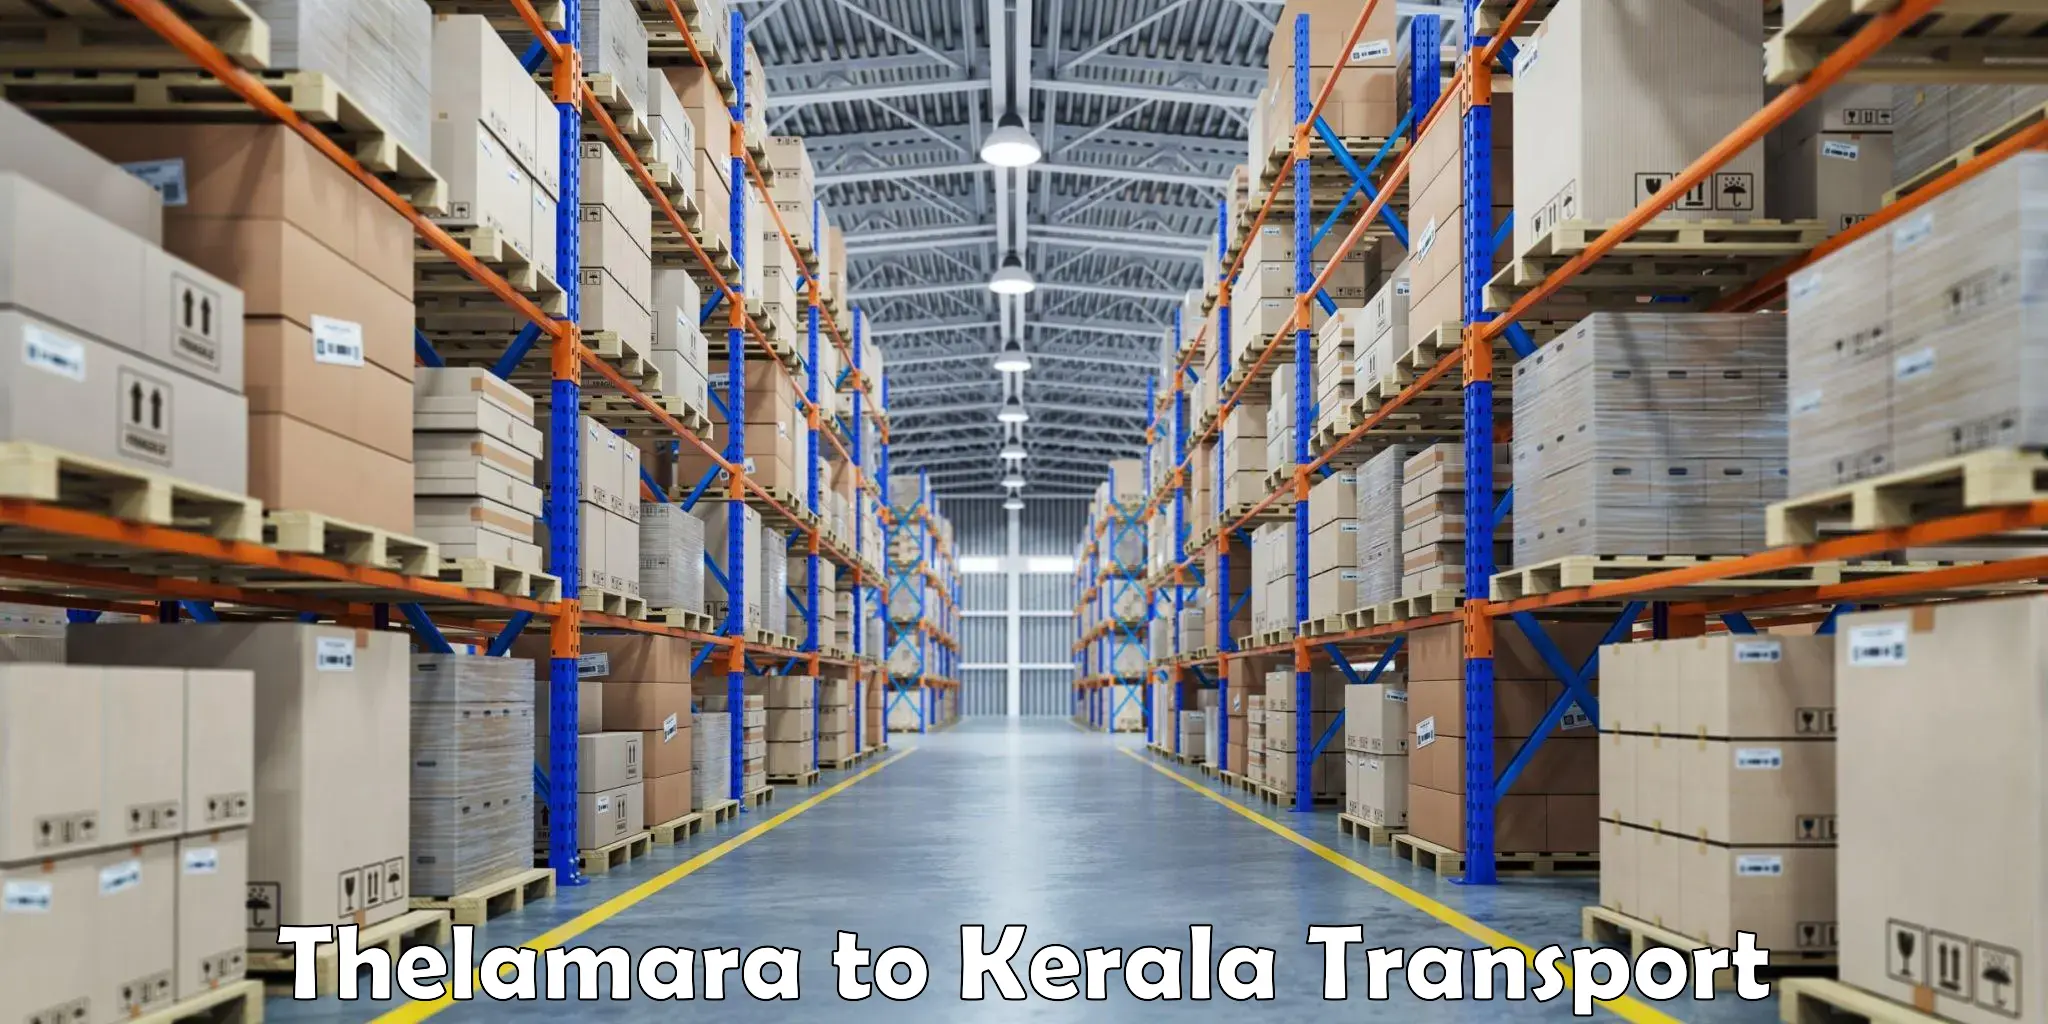 Transport in sharing Thelamara to Cochin University of Science and Technology